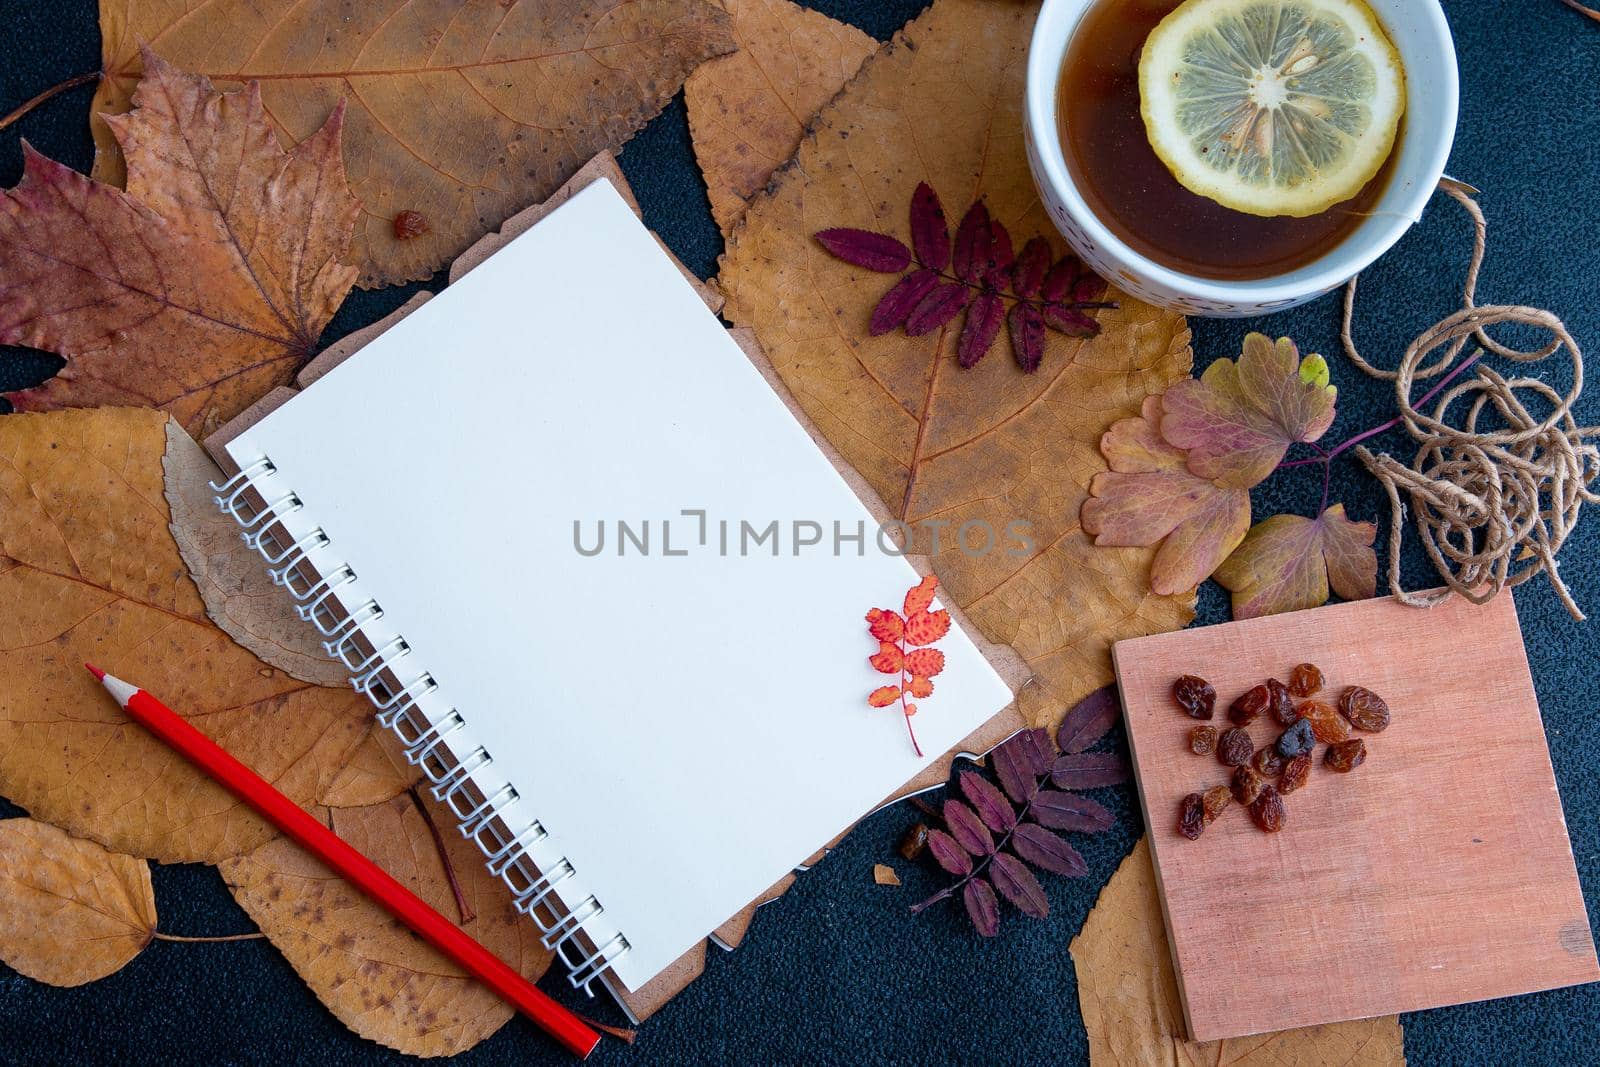 red pencil on an open notebook with readable sheets in a cage. objects on dry autumn leaves a cup with tea and a slice of lemon raisins on a notebook scetch book